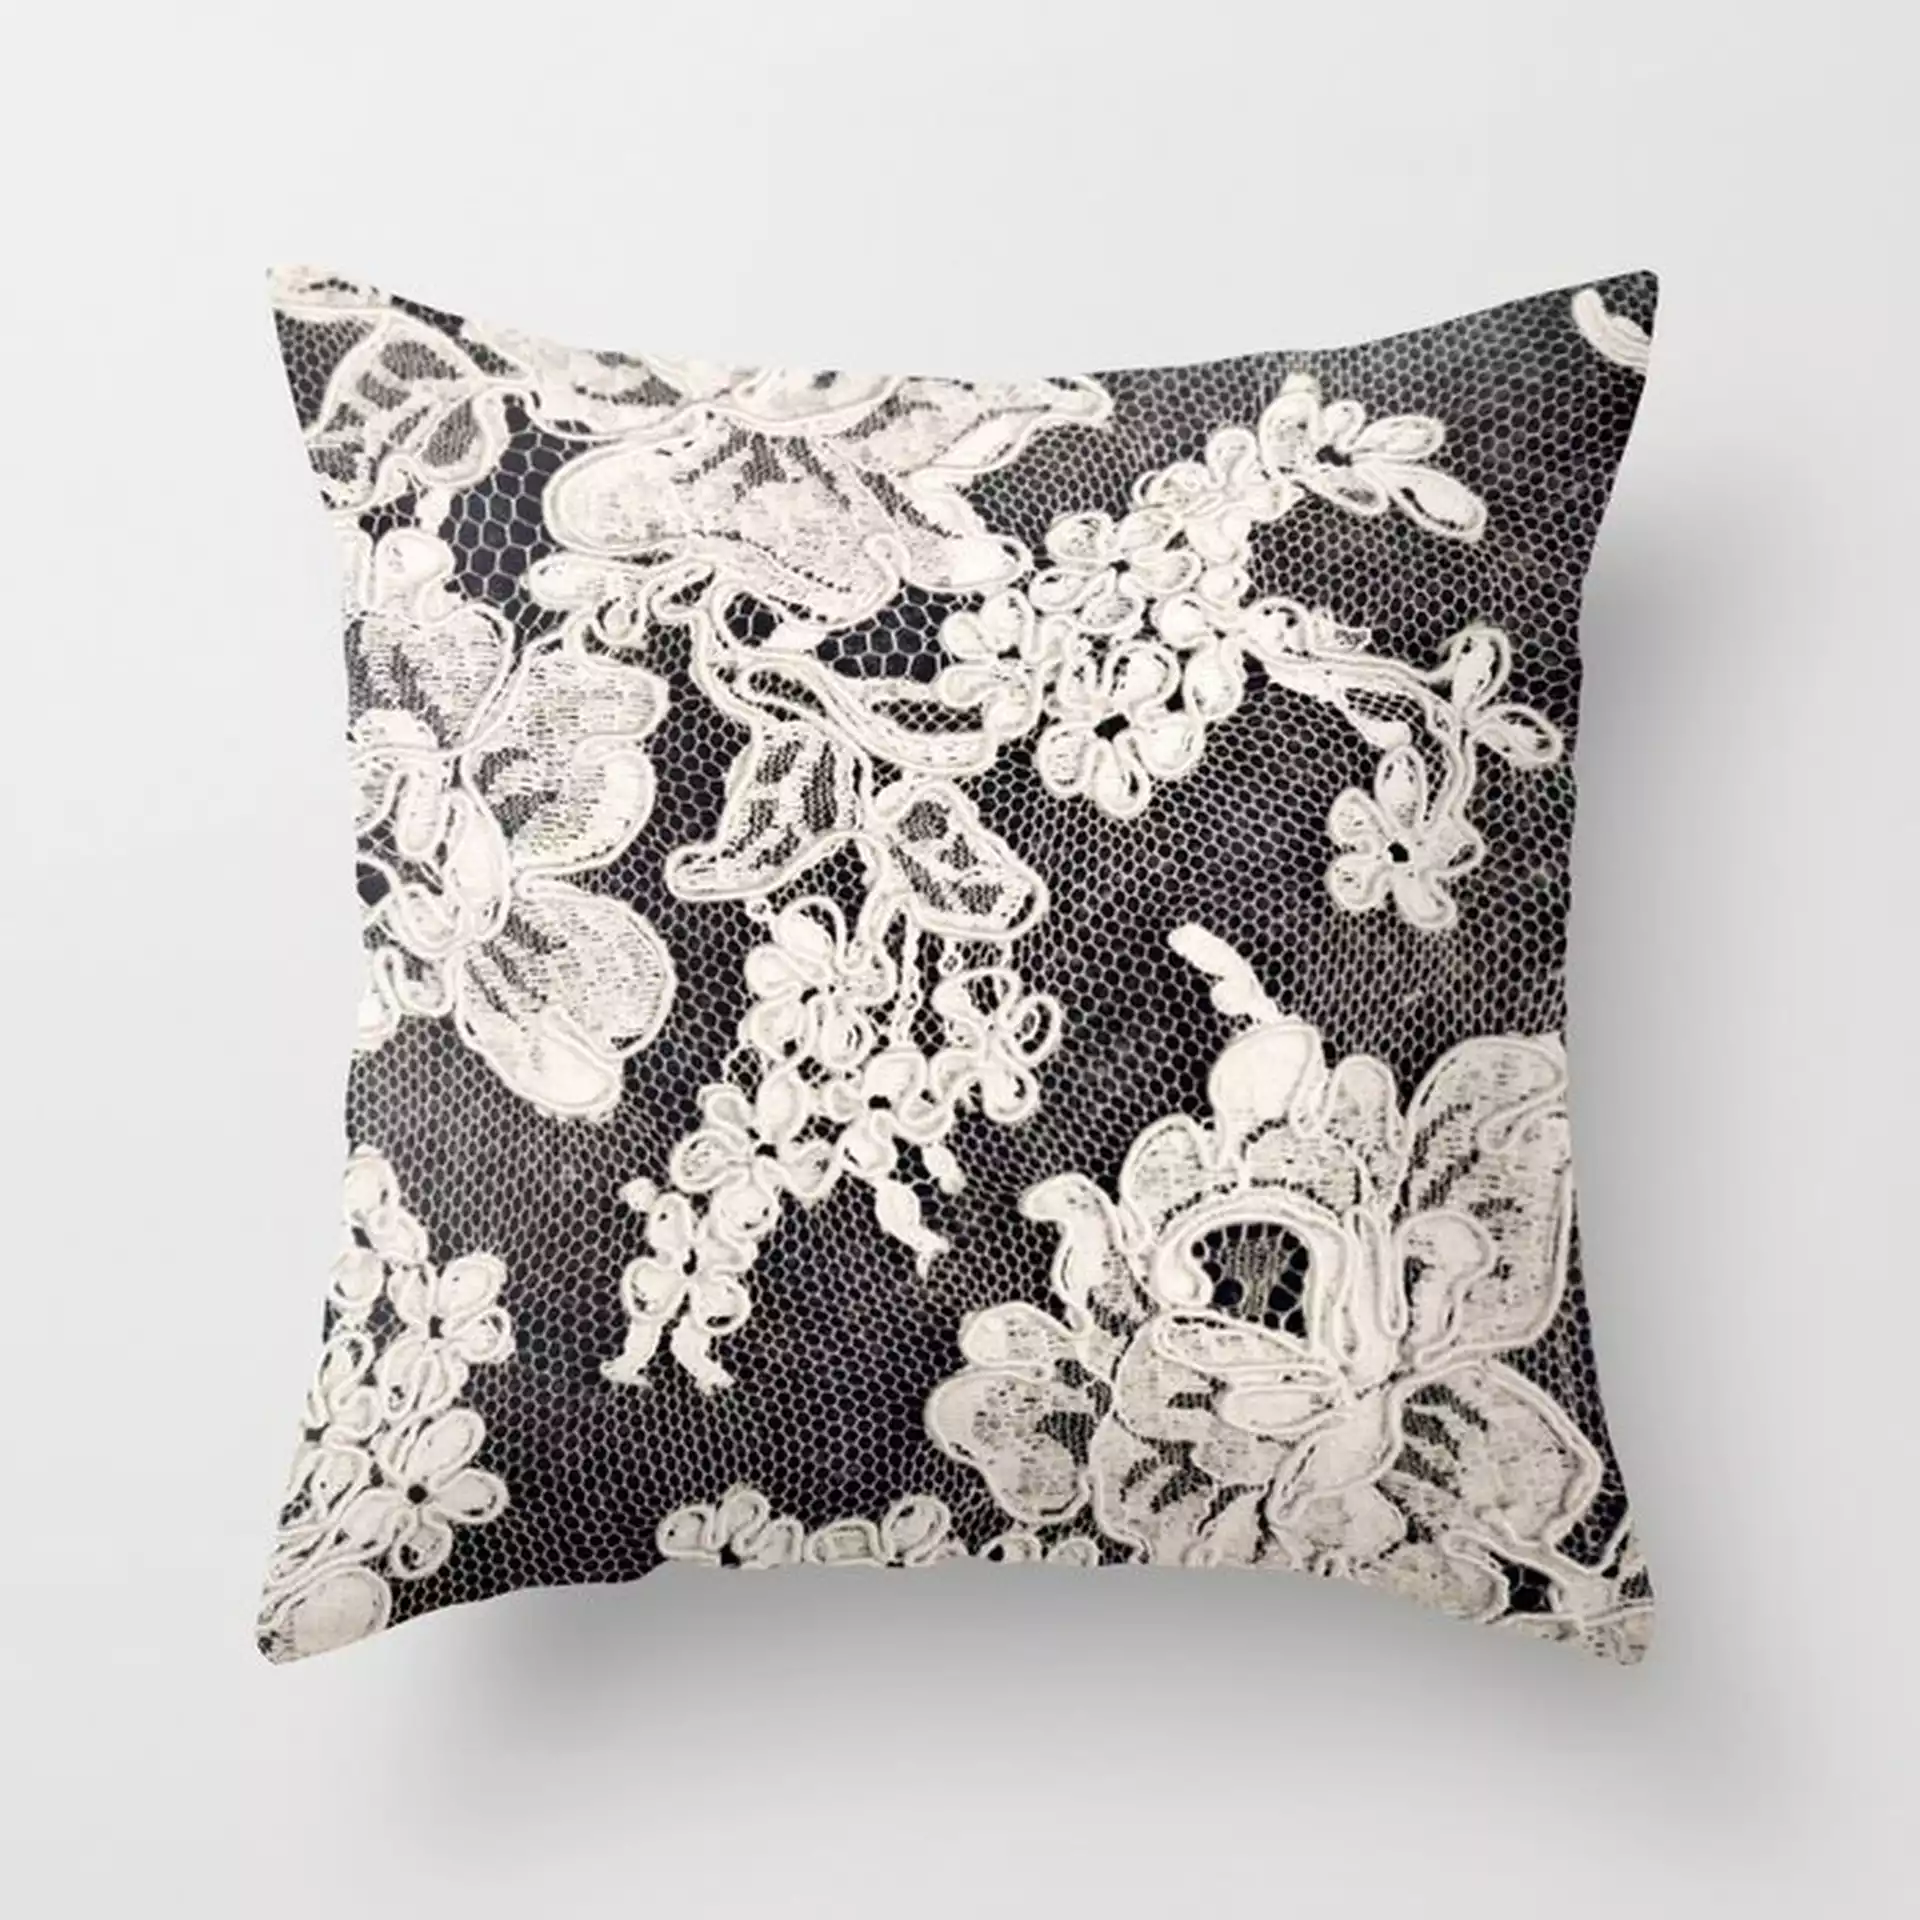 Black And White Lace- Photograph Of Vintage Lace Couch Throw Pillow by Sylvia Cook Photography - Cover (18" x 18") with pillow insert - Indoor Pillow